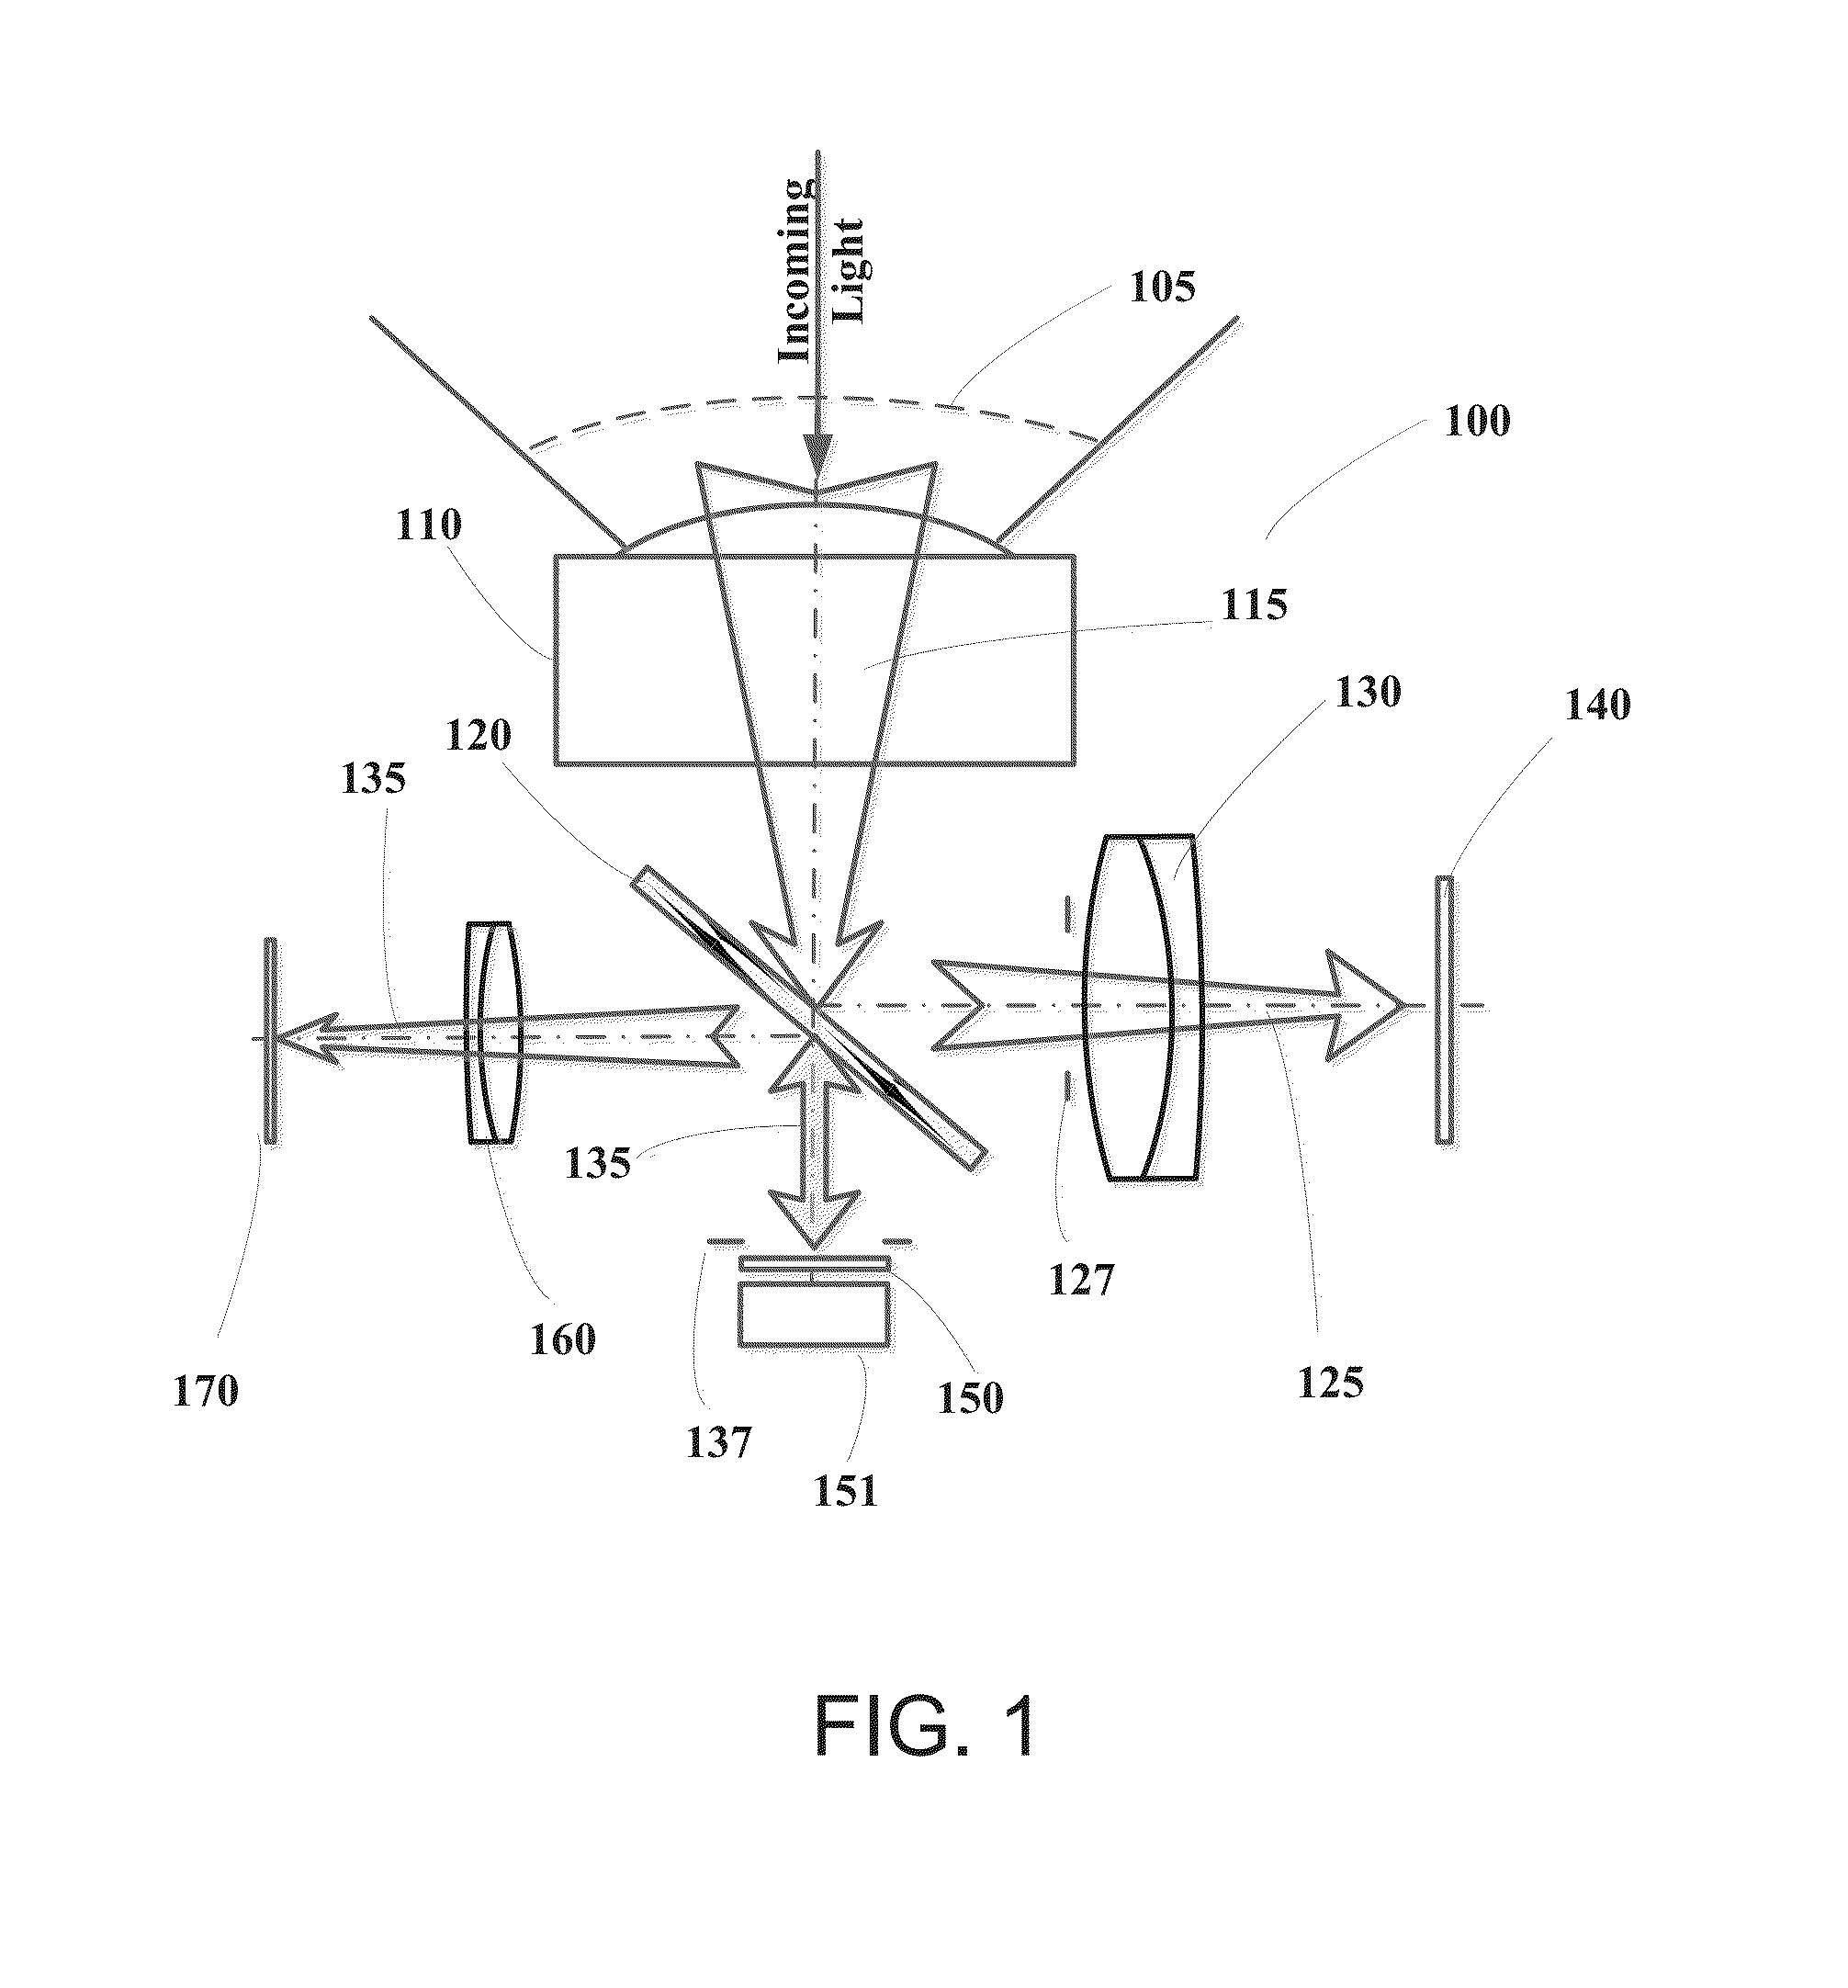 Wide-field of view (FOV) imaging devices with active foveation capability